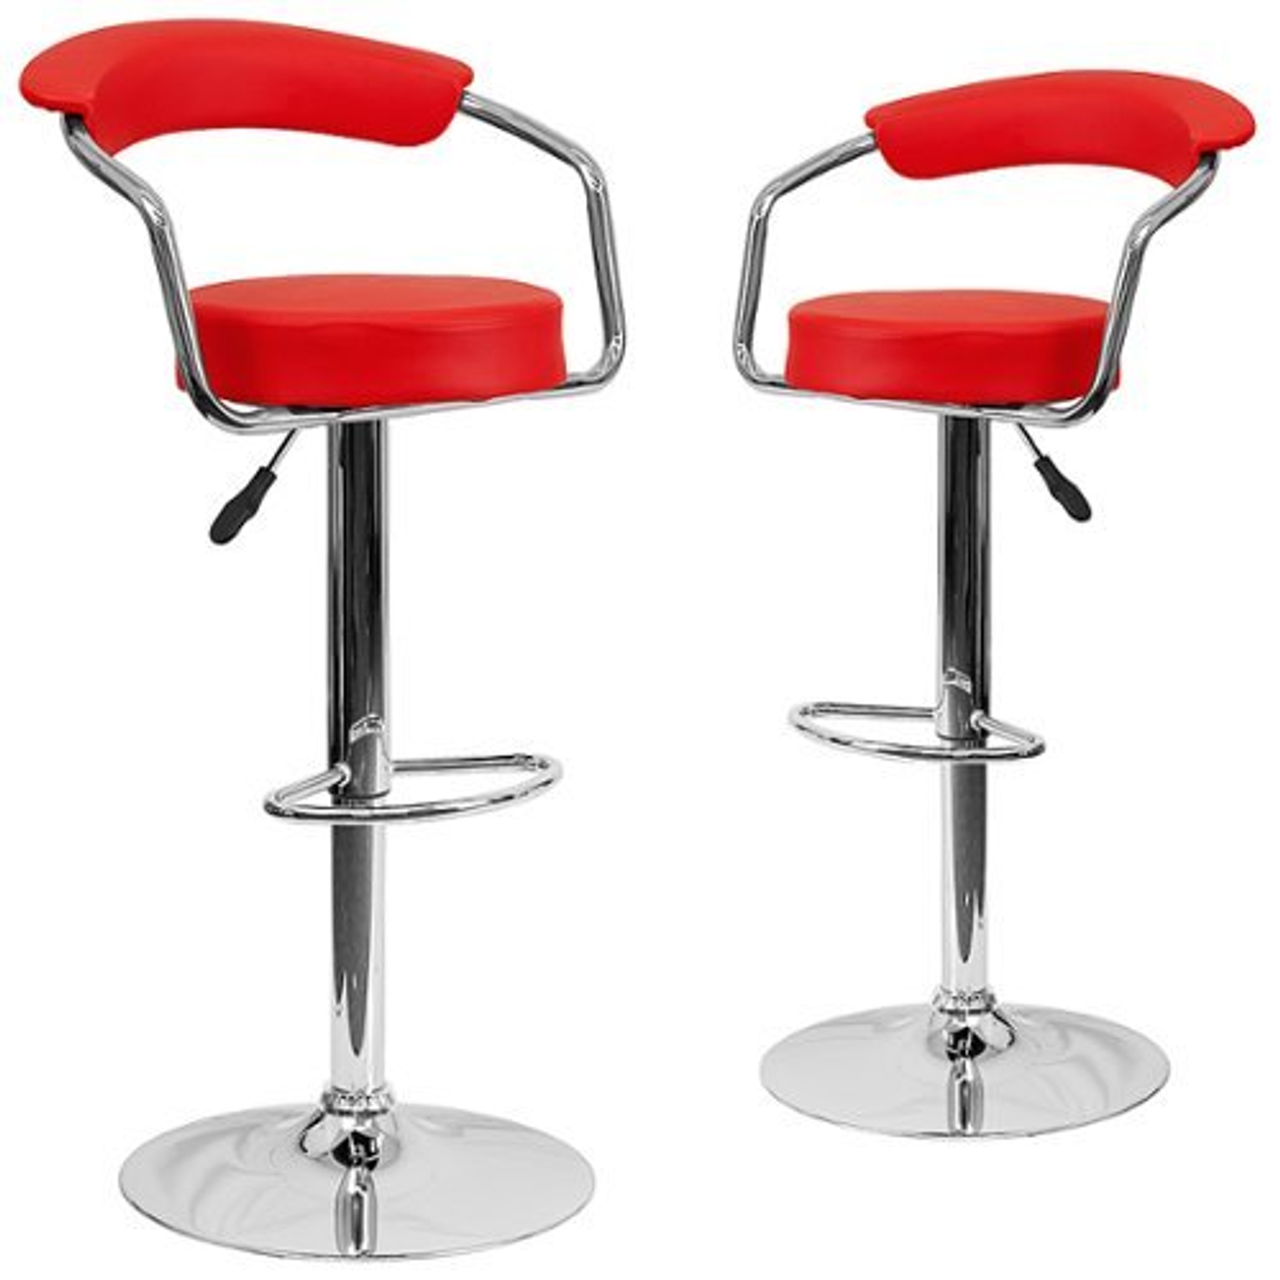 Flash Furniture - 2 Pack Contemporary Vinyl Adjustable Height Barstool with Arms and Chrome Base - Red